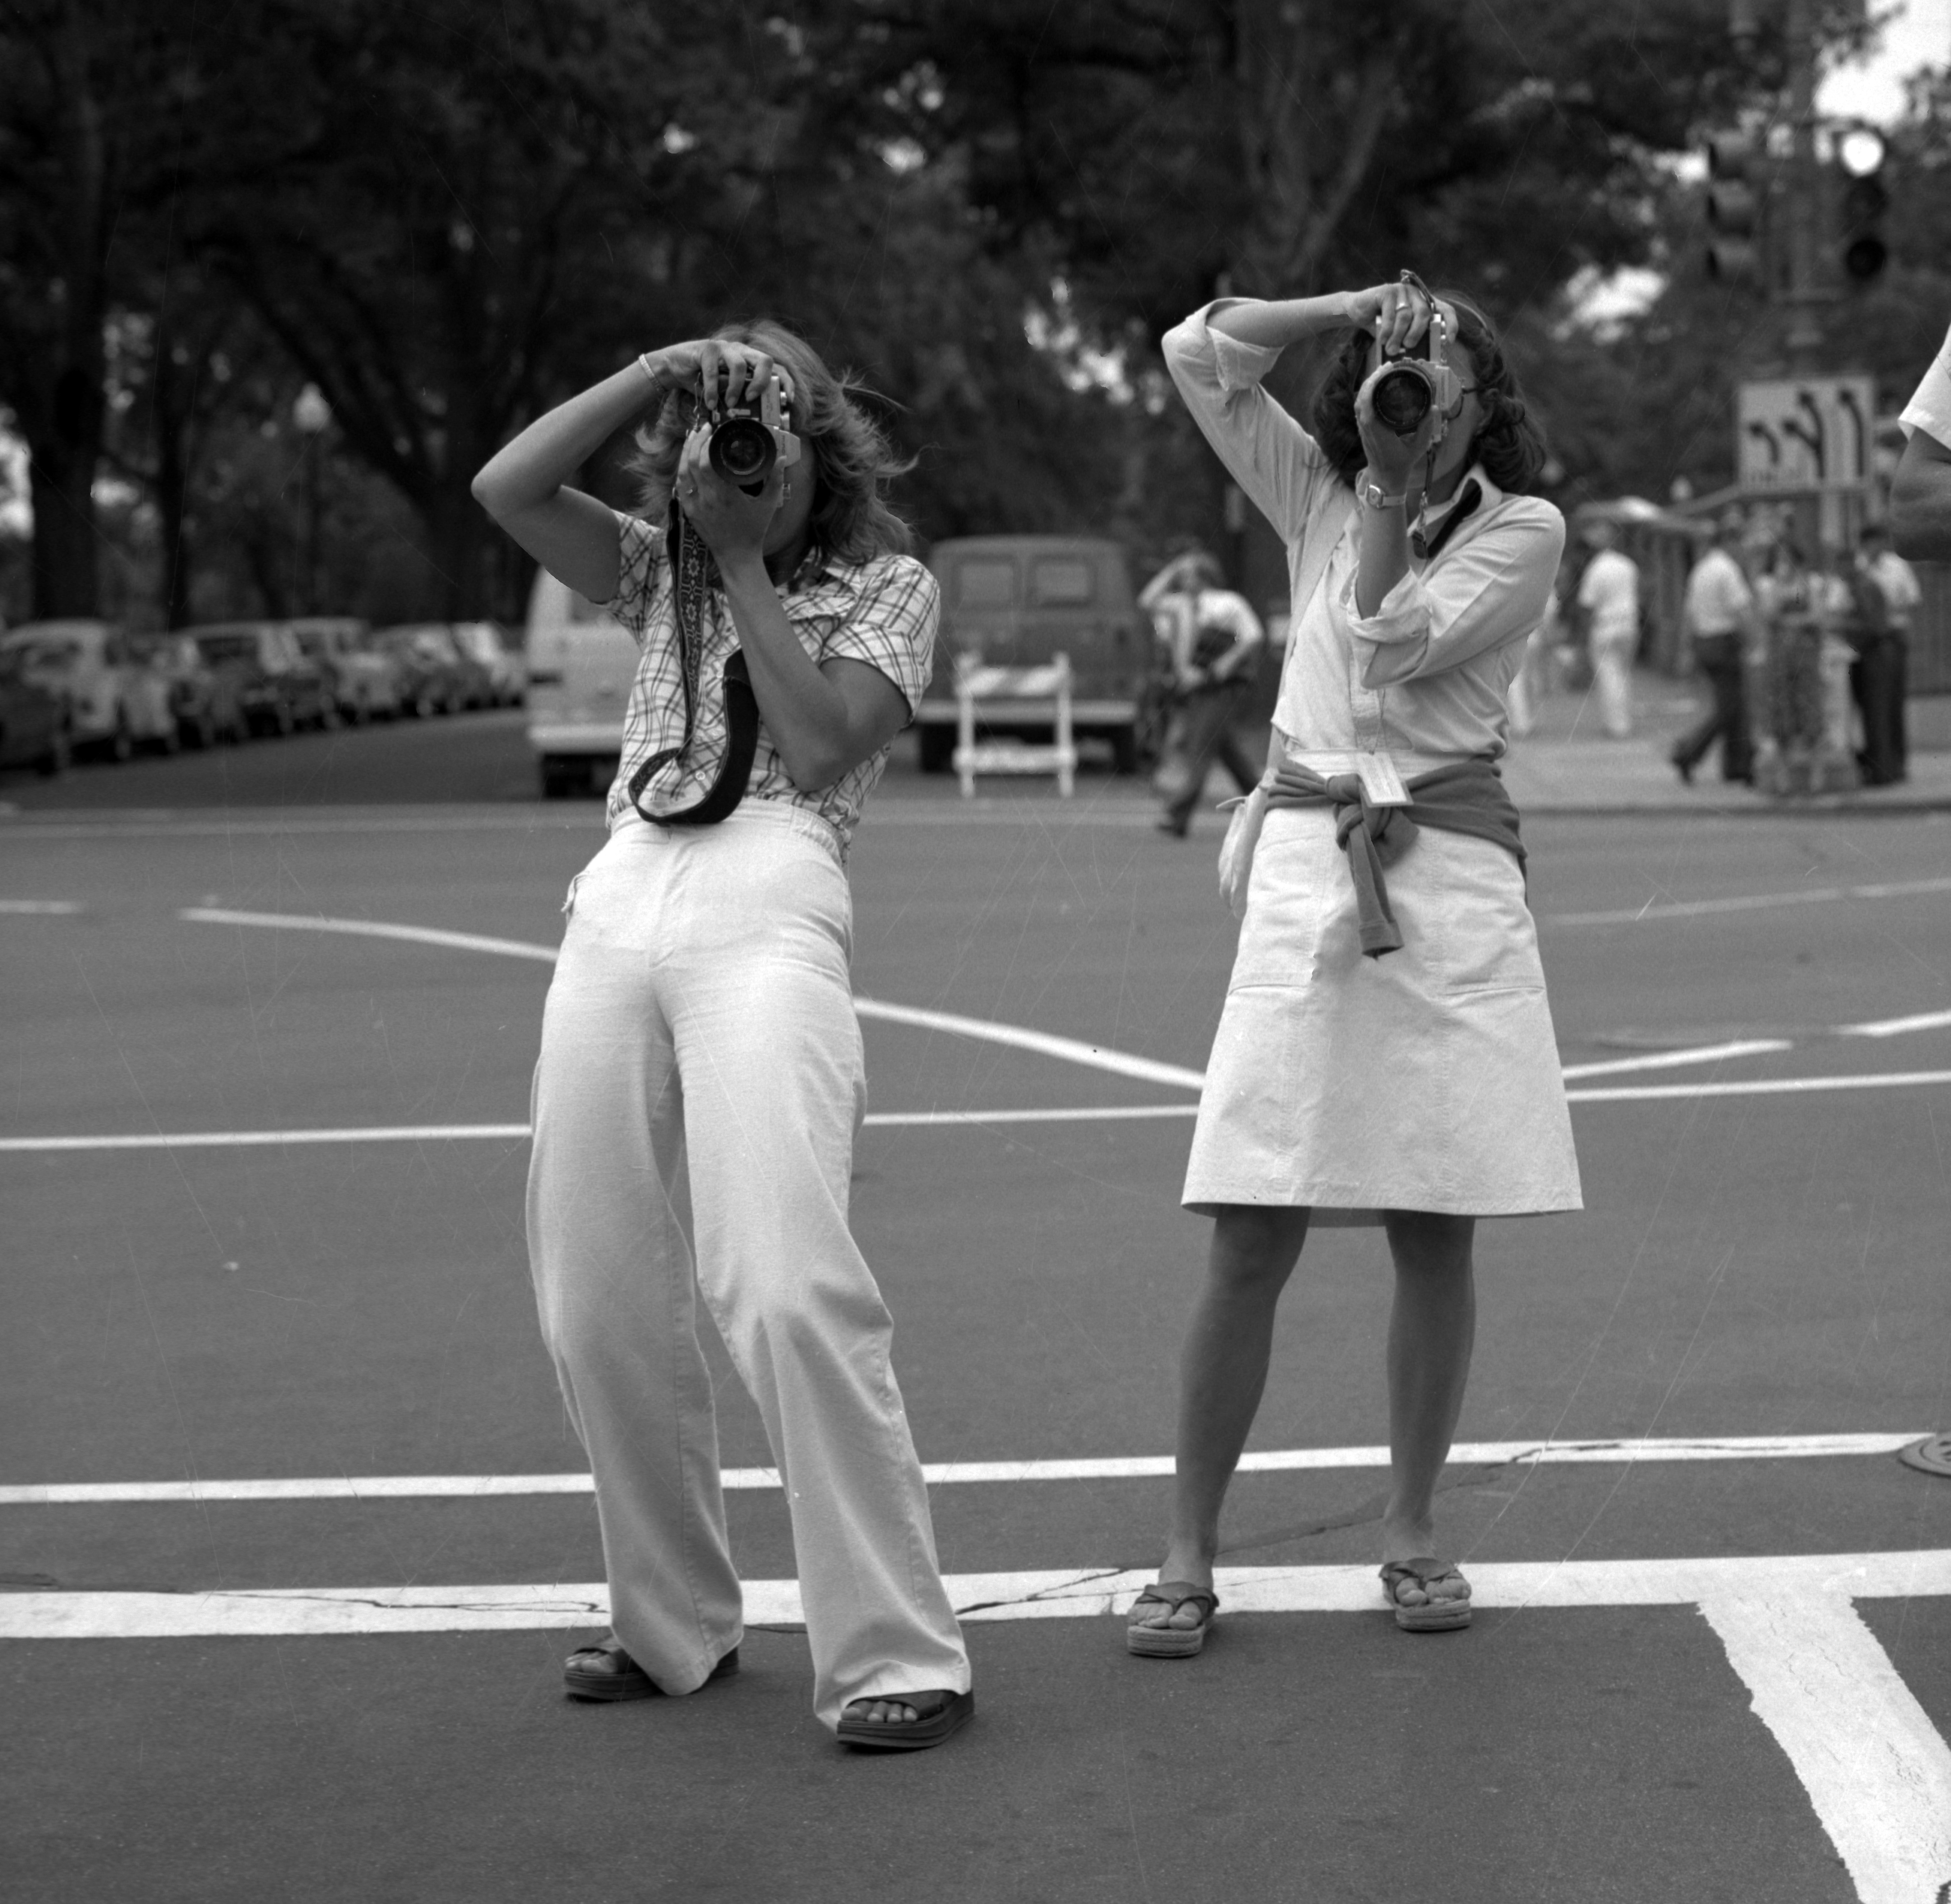 Two women, wearing white, hold cameras up to their eyes. Their faces are not visible. The camera is 